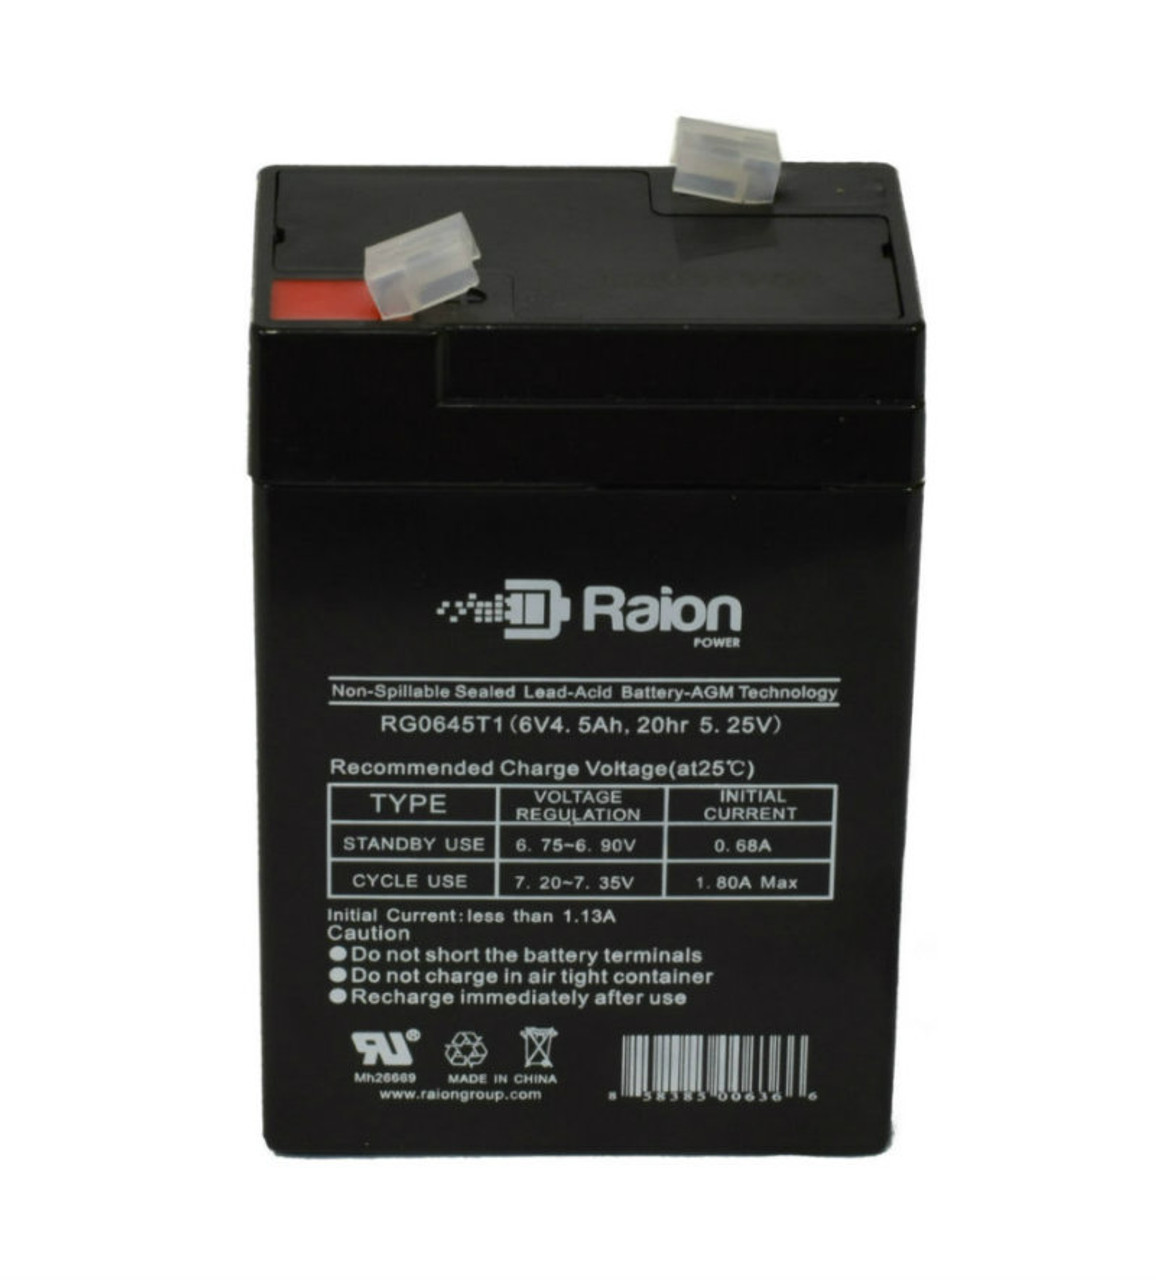 Raion Power RG0645T1 Replacement Battery Cartridge for Tysonic TY6-5.0